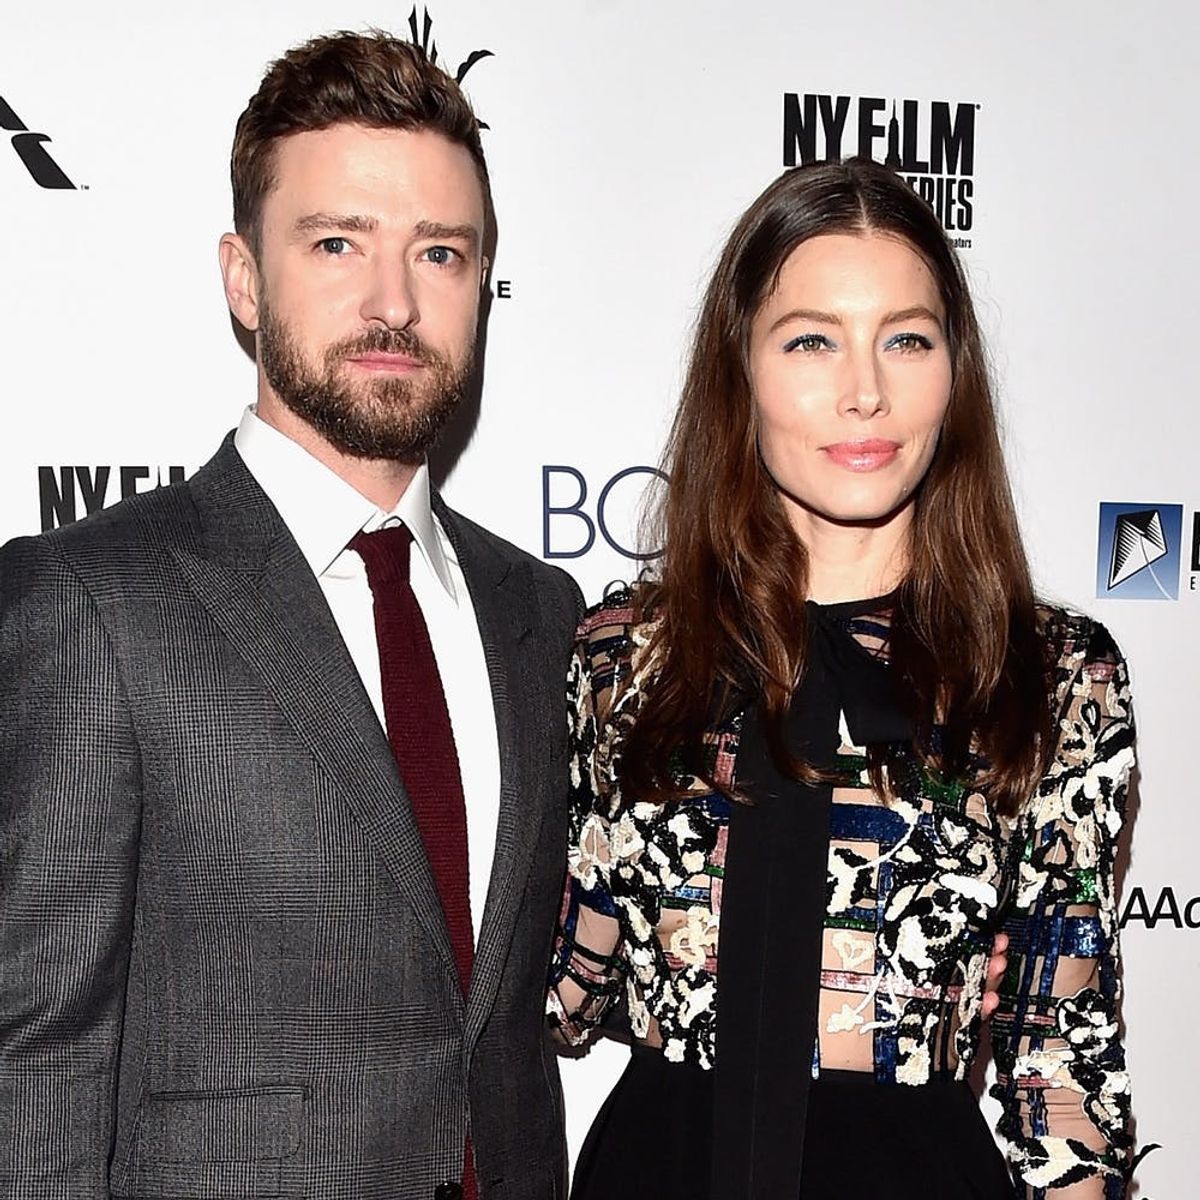 Fans Think Jessica Biel Is Featured on Justin Timberlake’s “Filthy” New Track